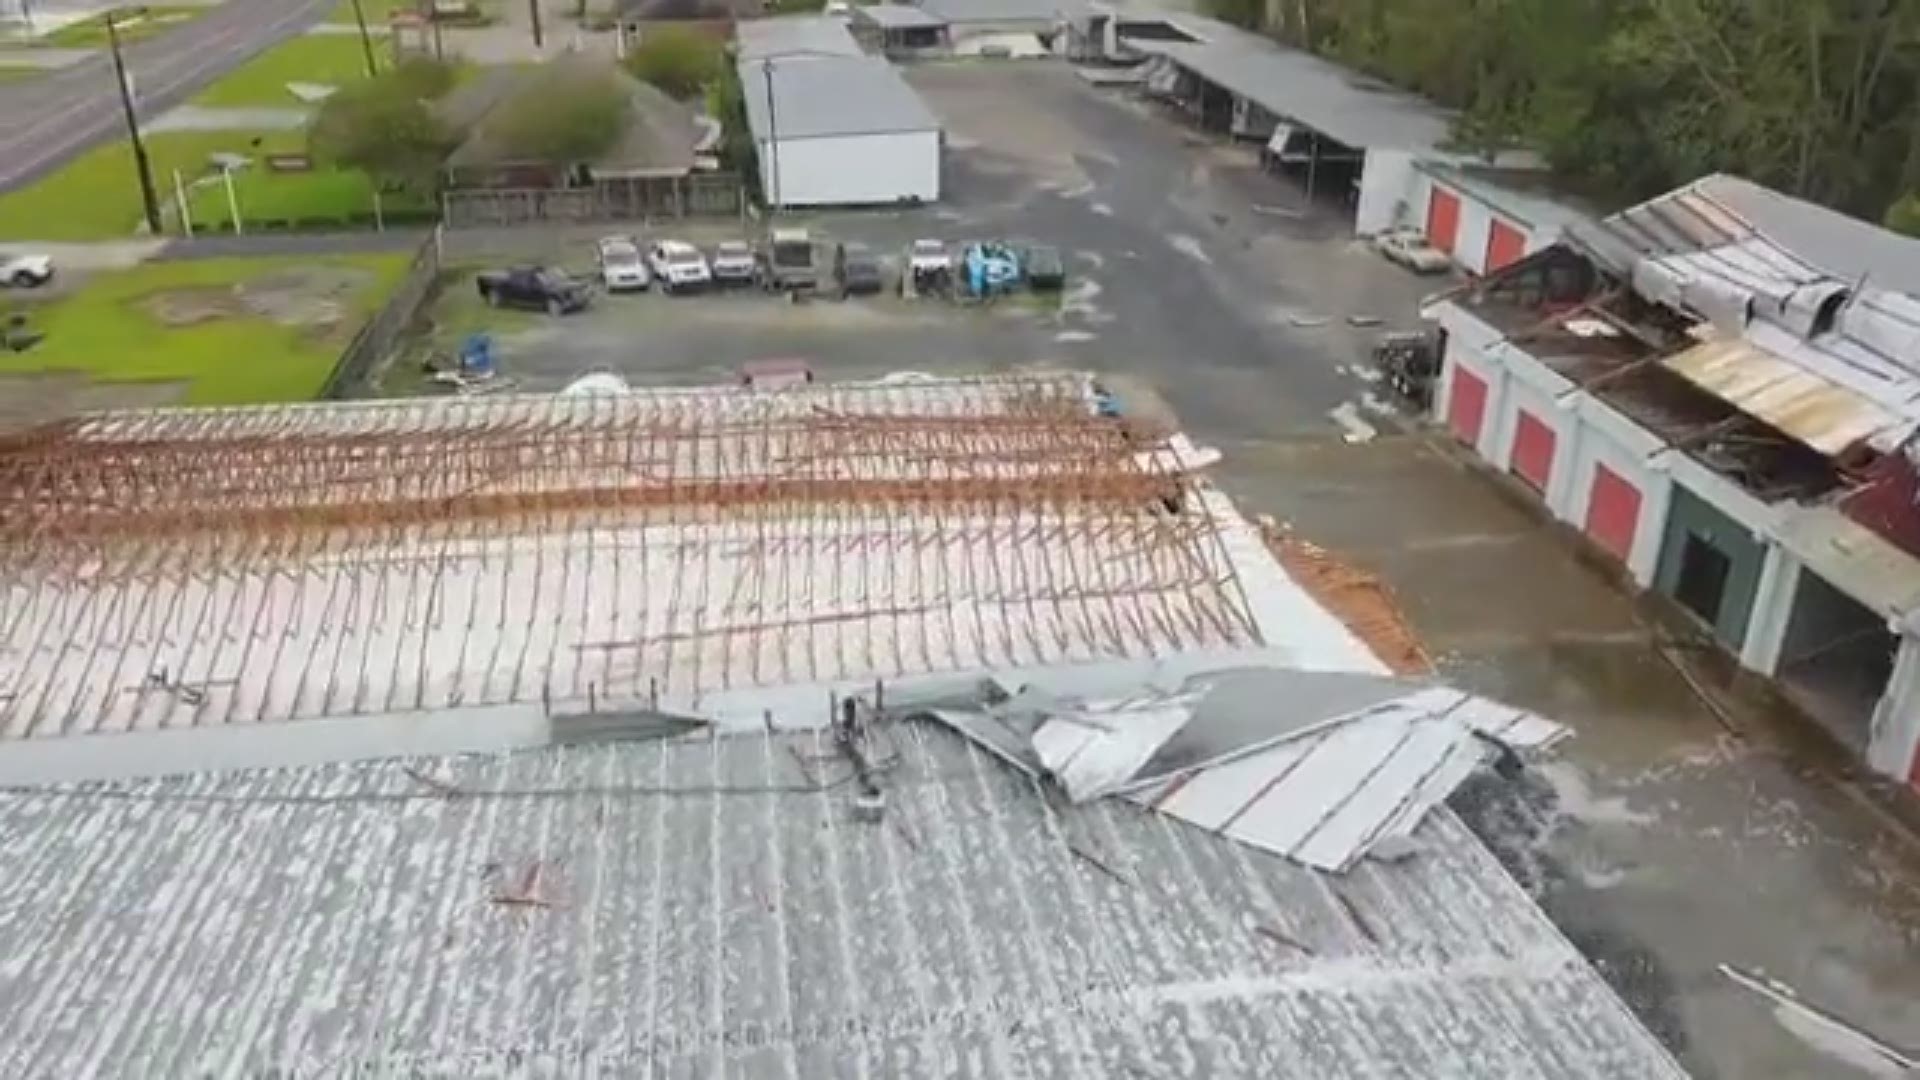 Drone video captures a video of the damage caused by Hurricane Laura to a warehouse in Orange County, Texas